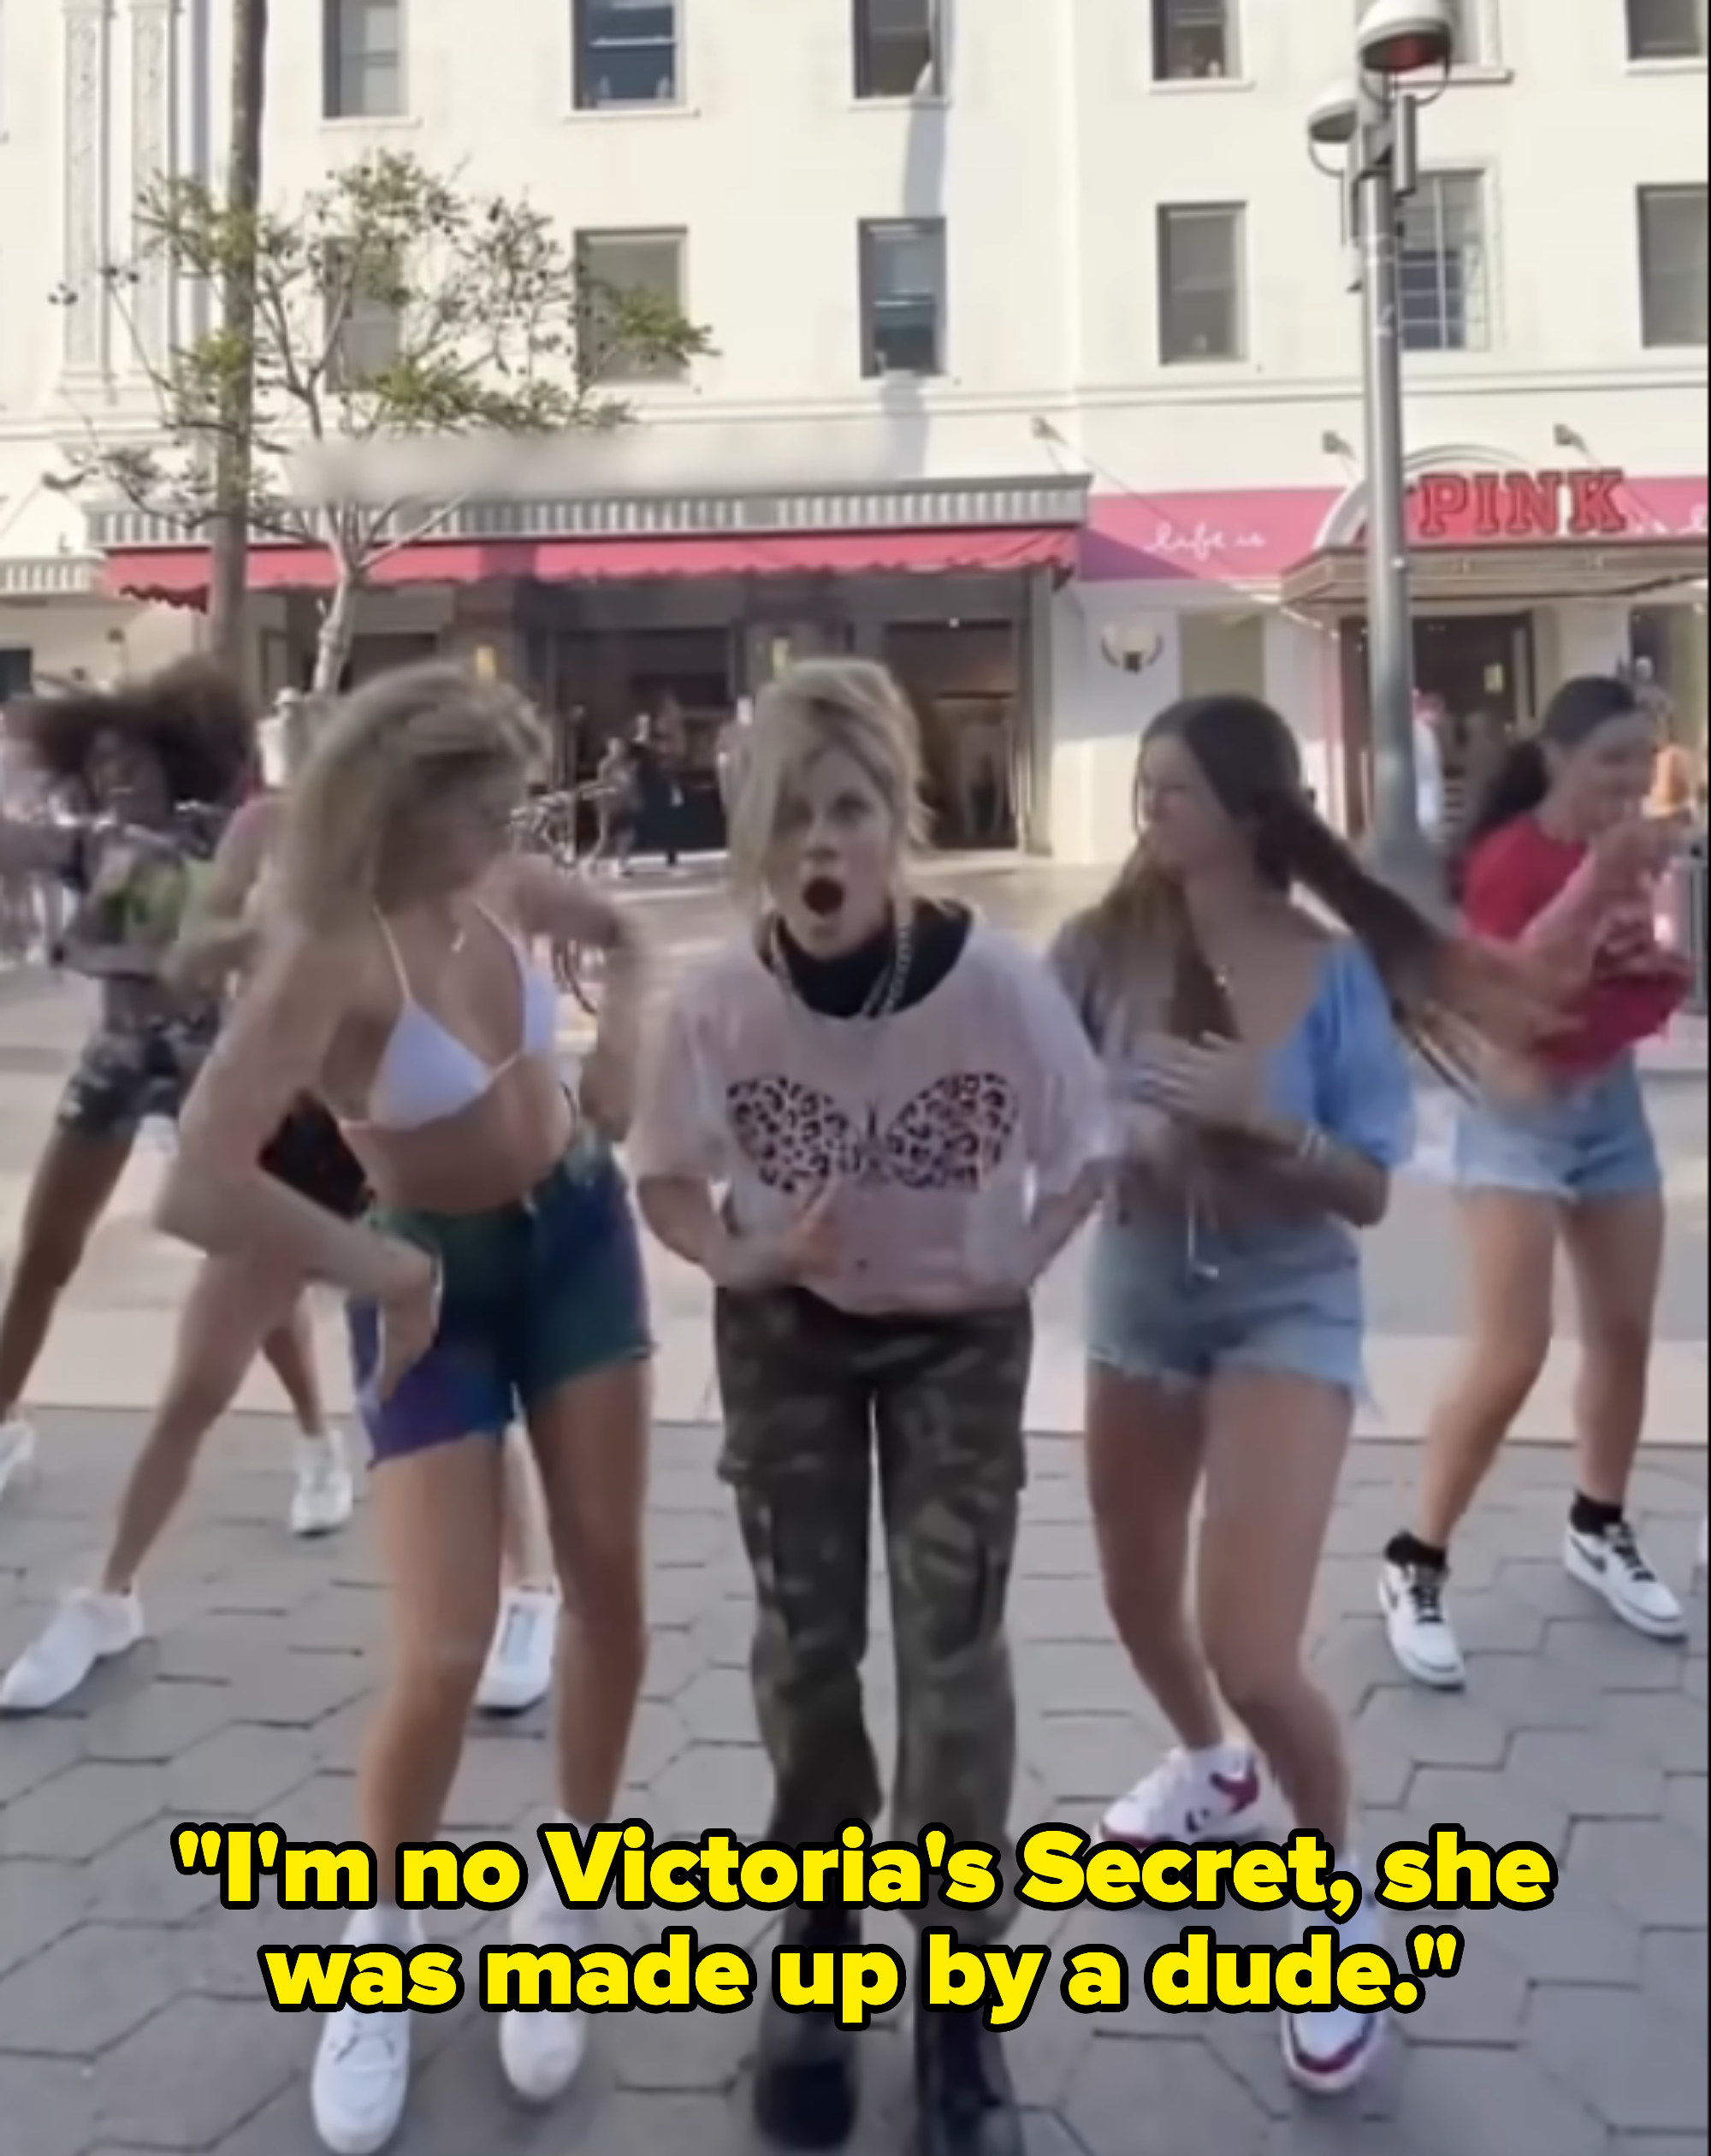 &quot;I&#x27;m no Victoria&#x27;s Secret, she was made up by a dude.&quot;